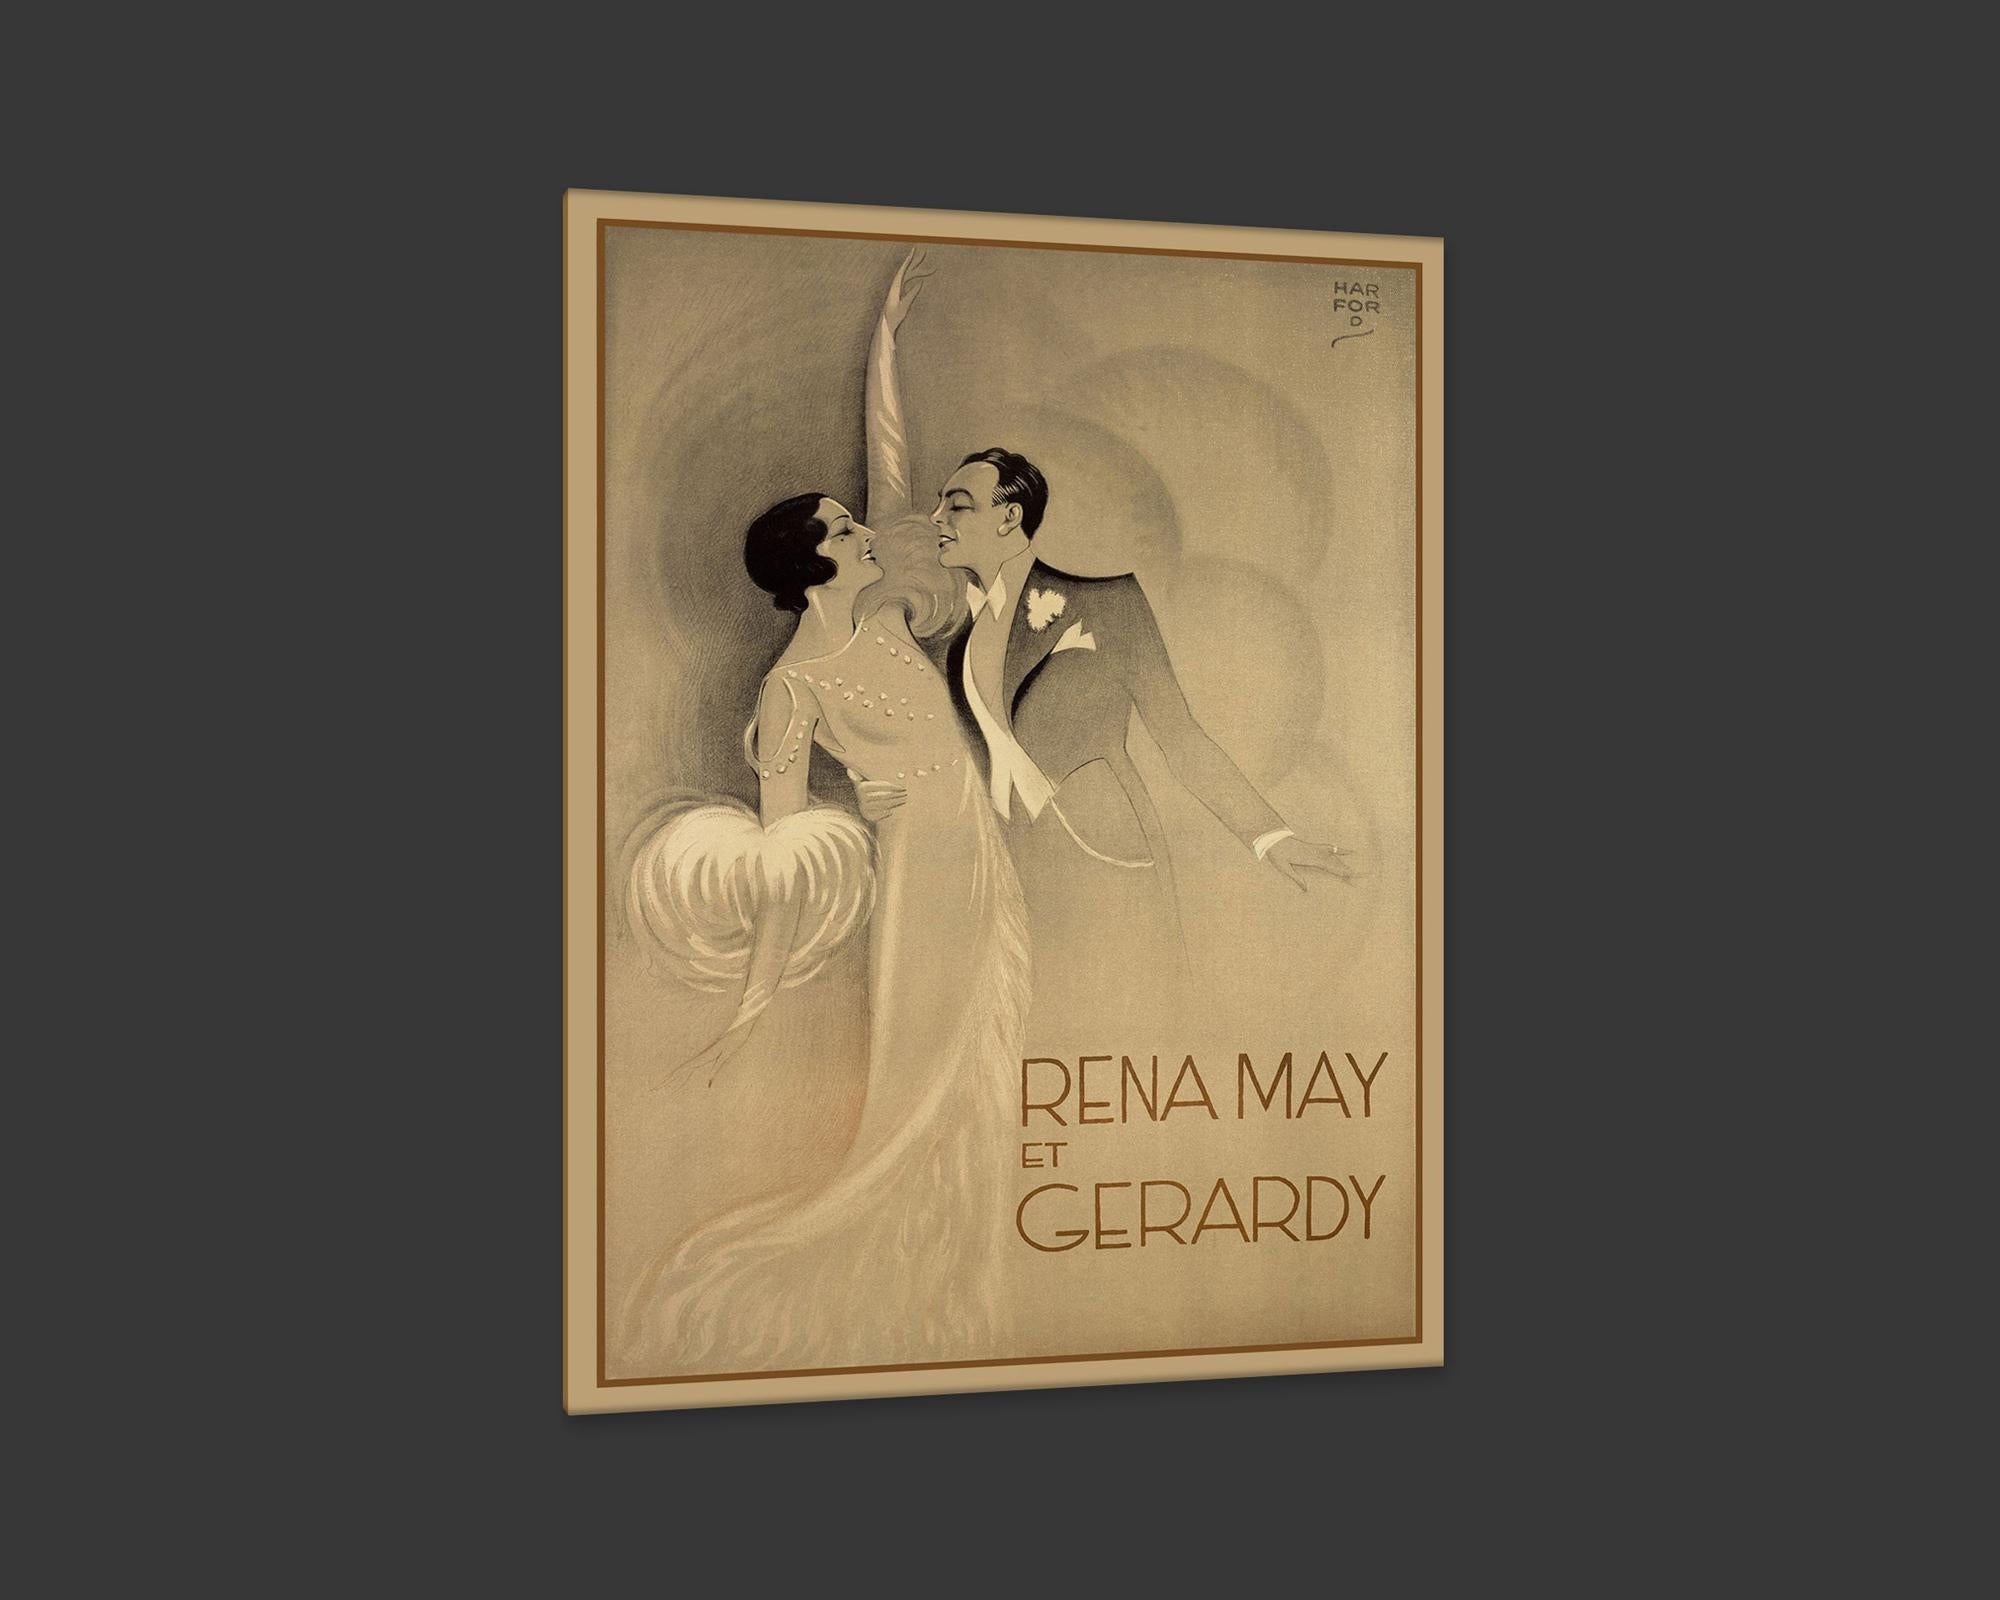 American Rena May et Gerardy, after Art Deco Poster by the Artist Harford For Sale